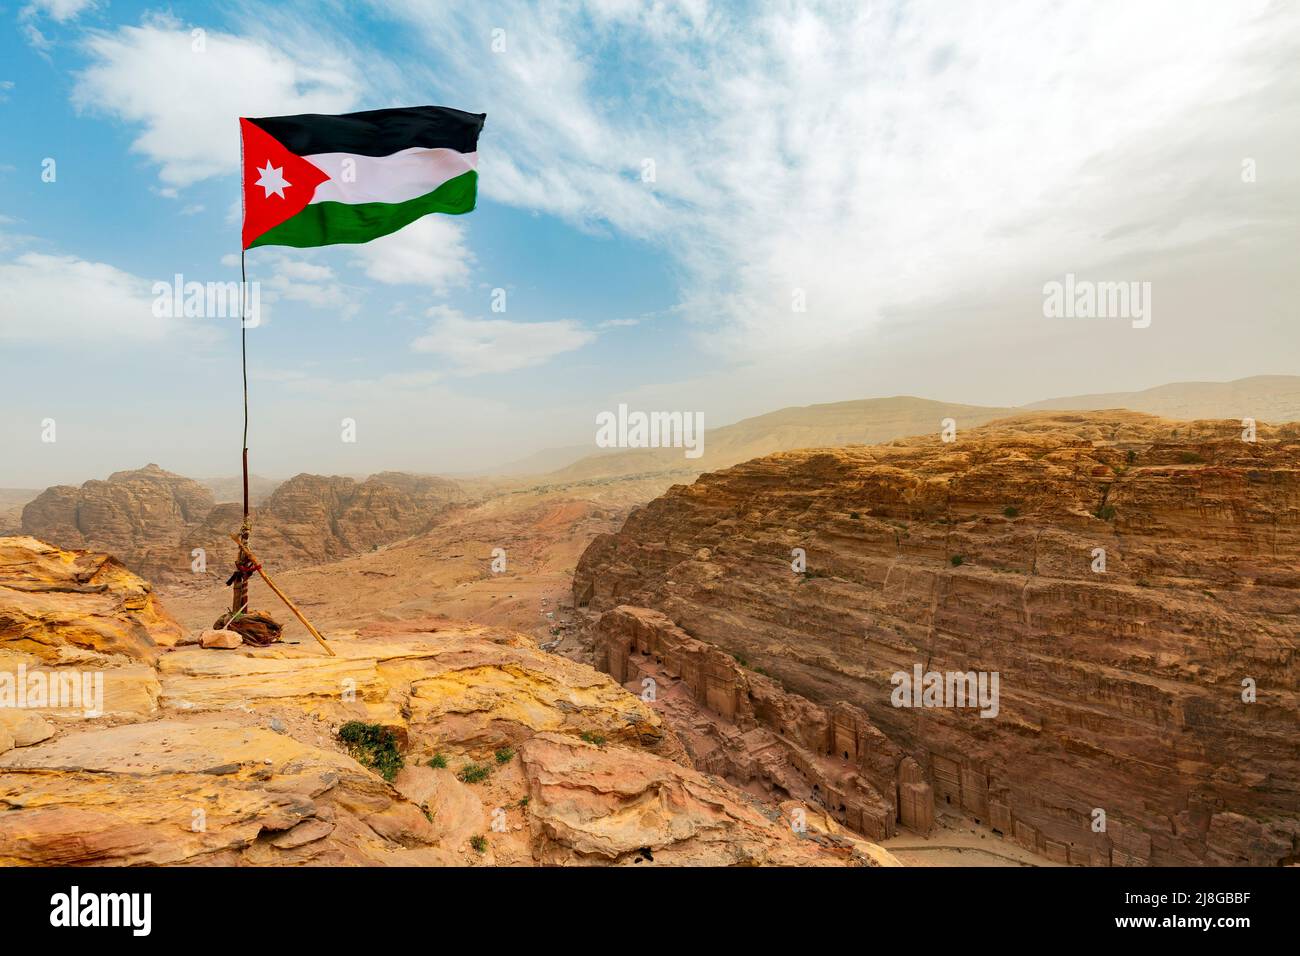 Jordan flag waving on a sunny and windy day in Petra landscape, Jordan Stock Photo